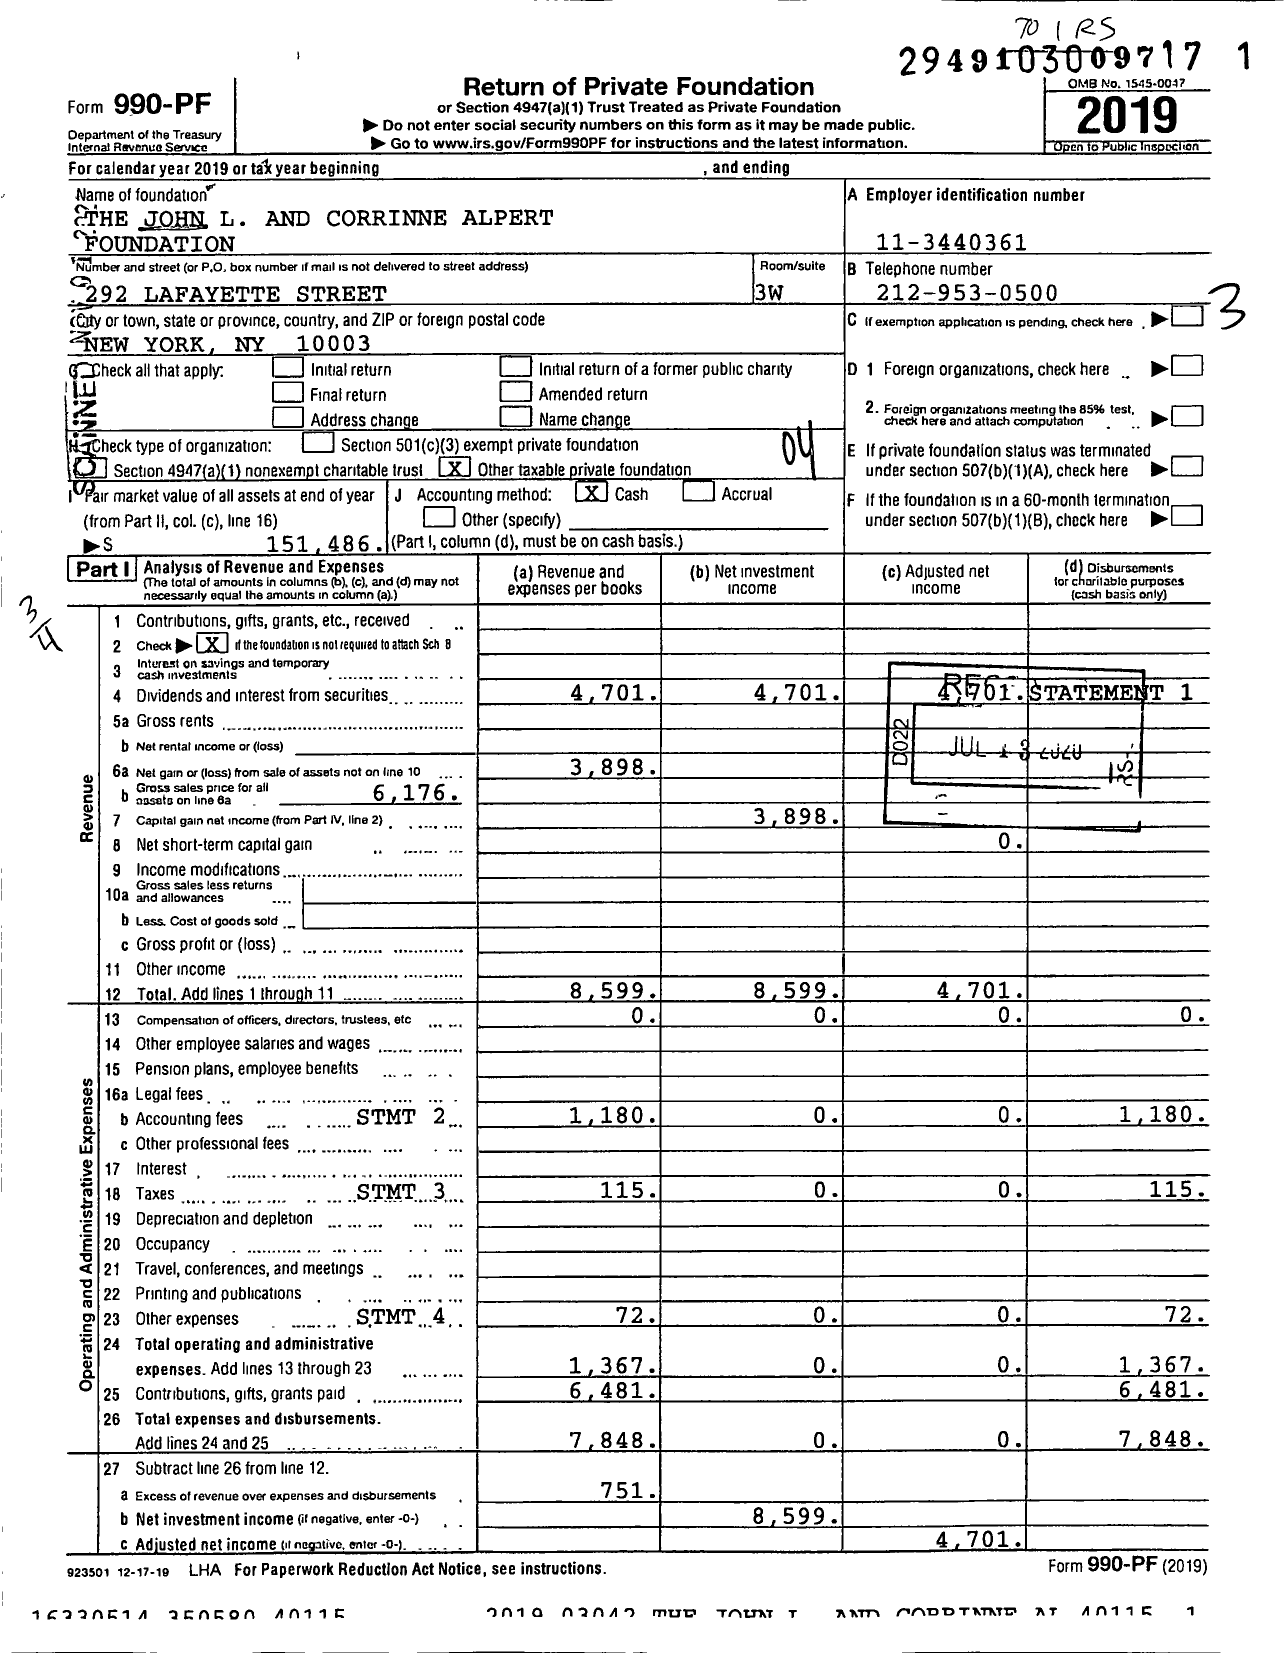 Image of first page of 2019 Form 990PF for The John L and Corrinne Alpert Foundation